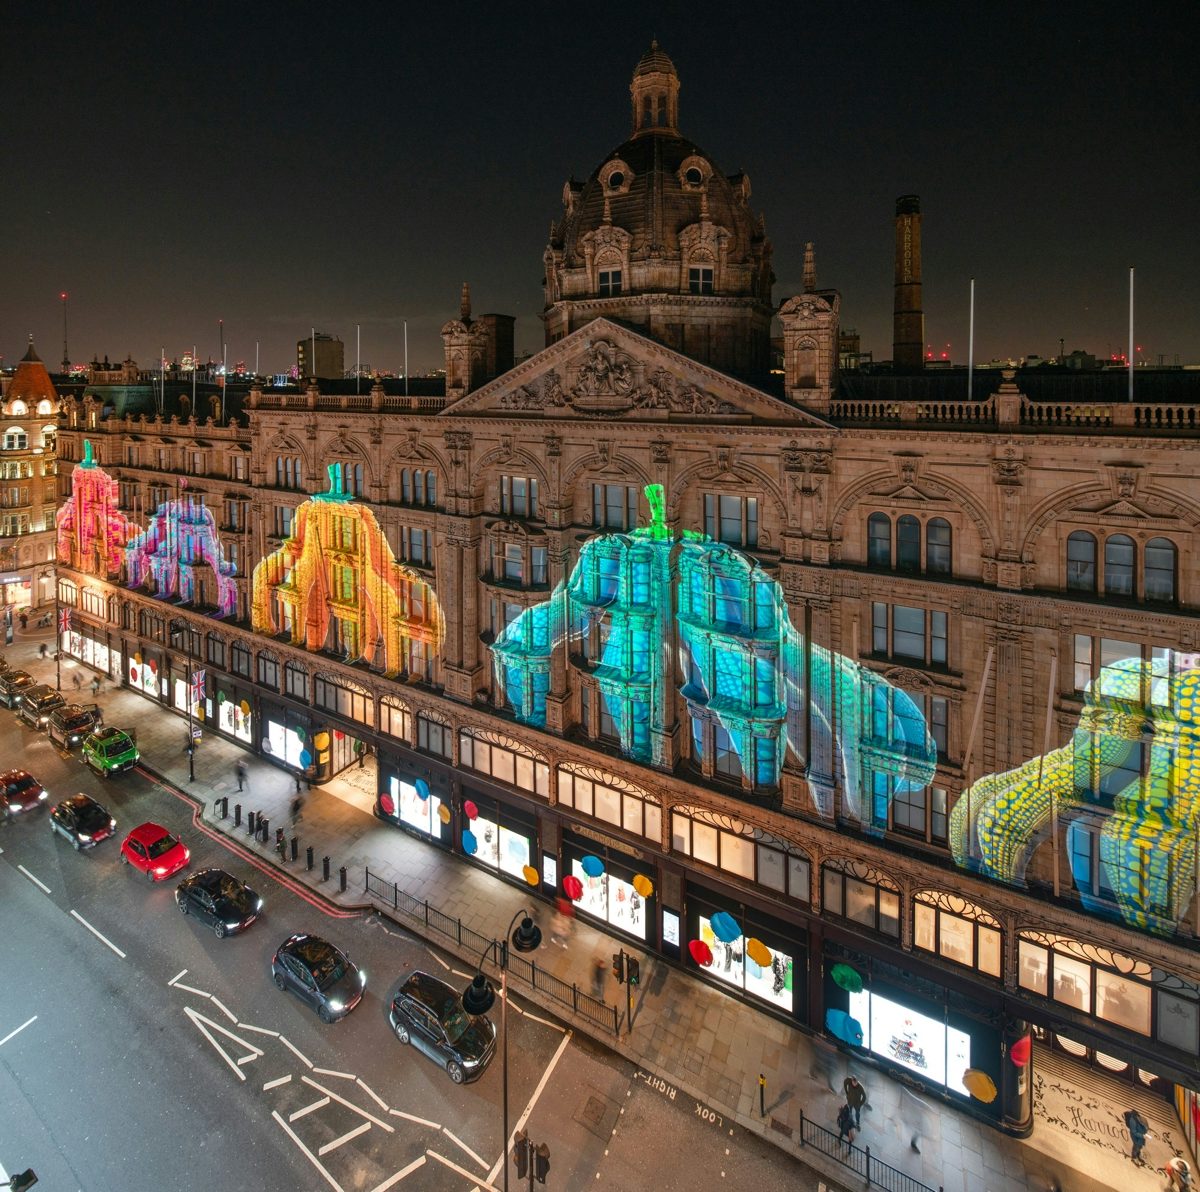 Harrods covered with dots for latest Louis Vuitton x Kusama collaboration -  Retail Gazette